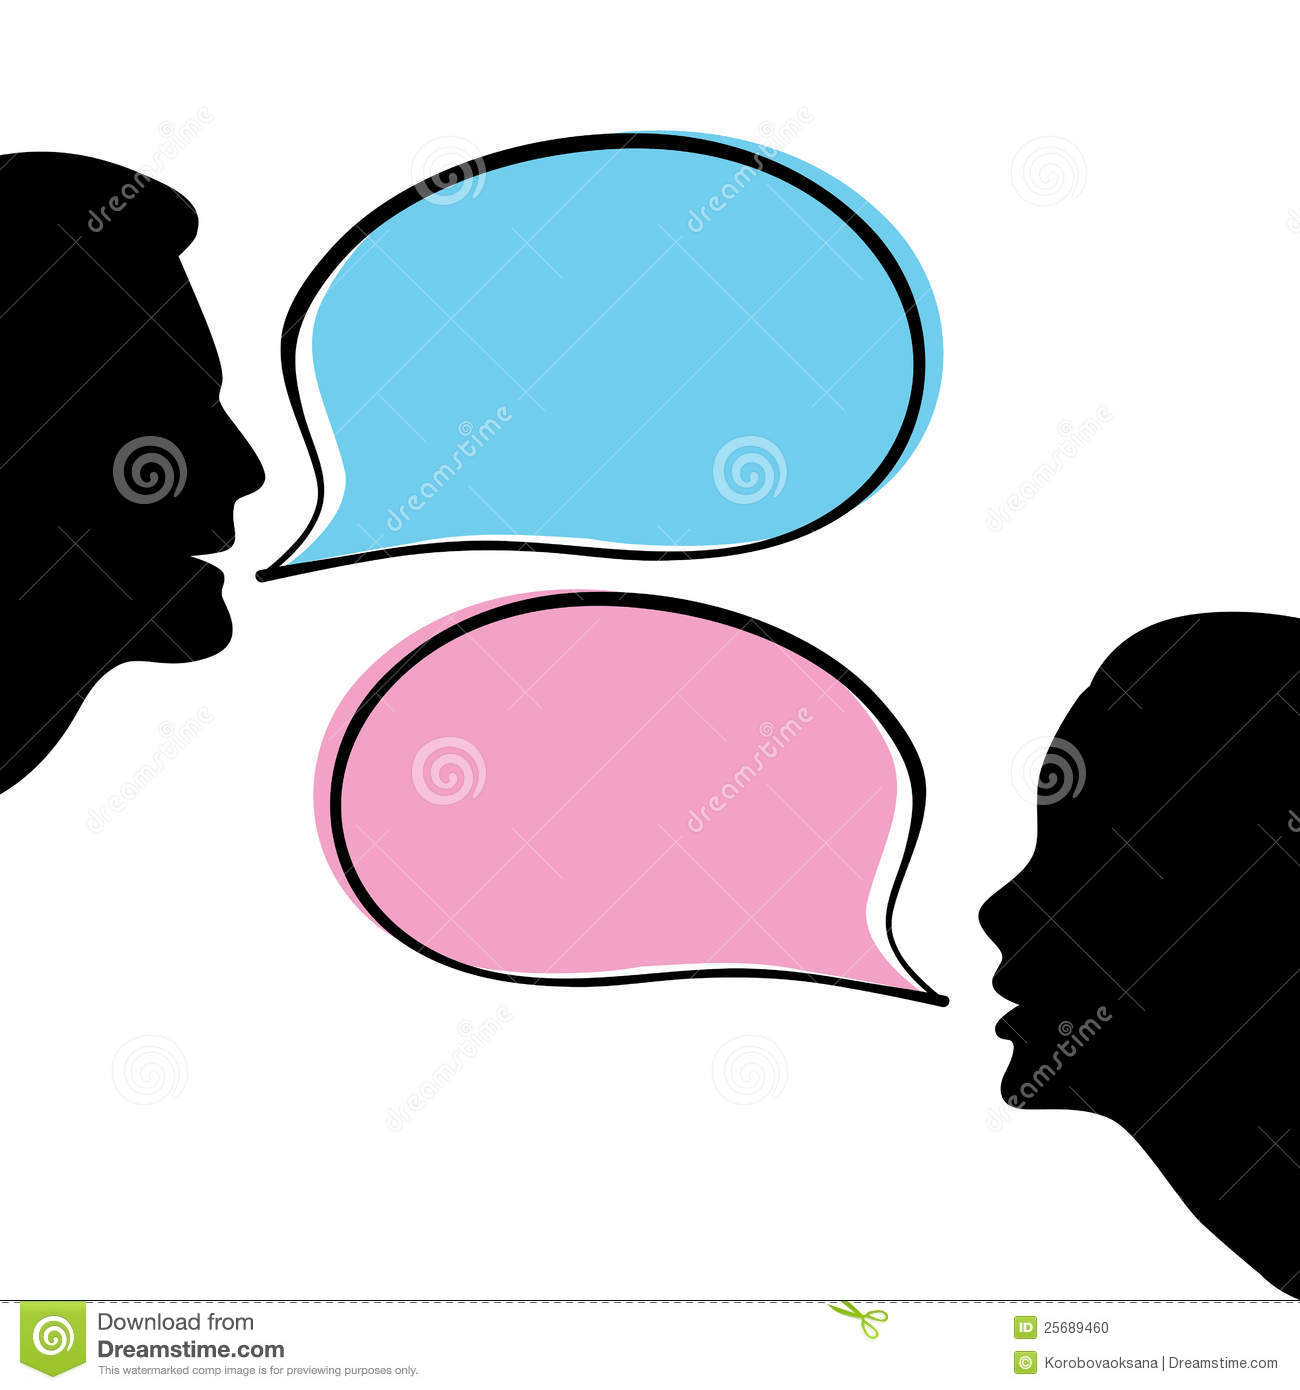 Dialogue Clipart Of Male And Female Dialog